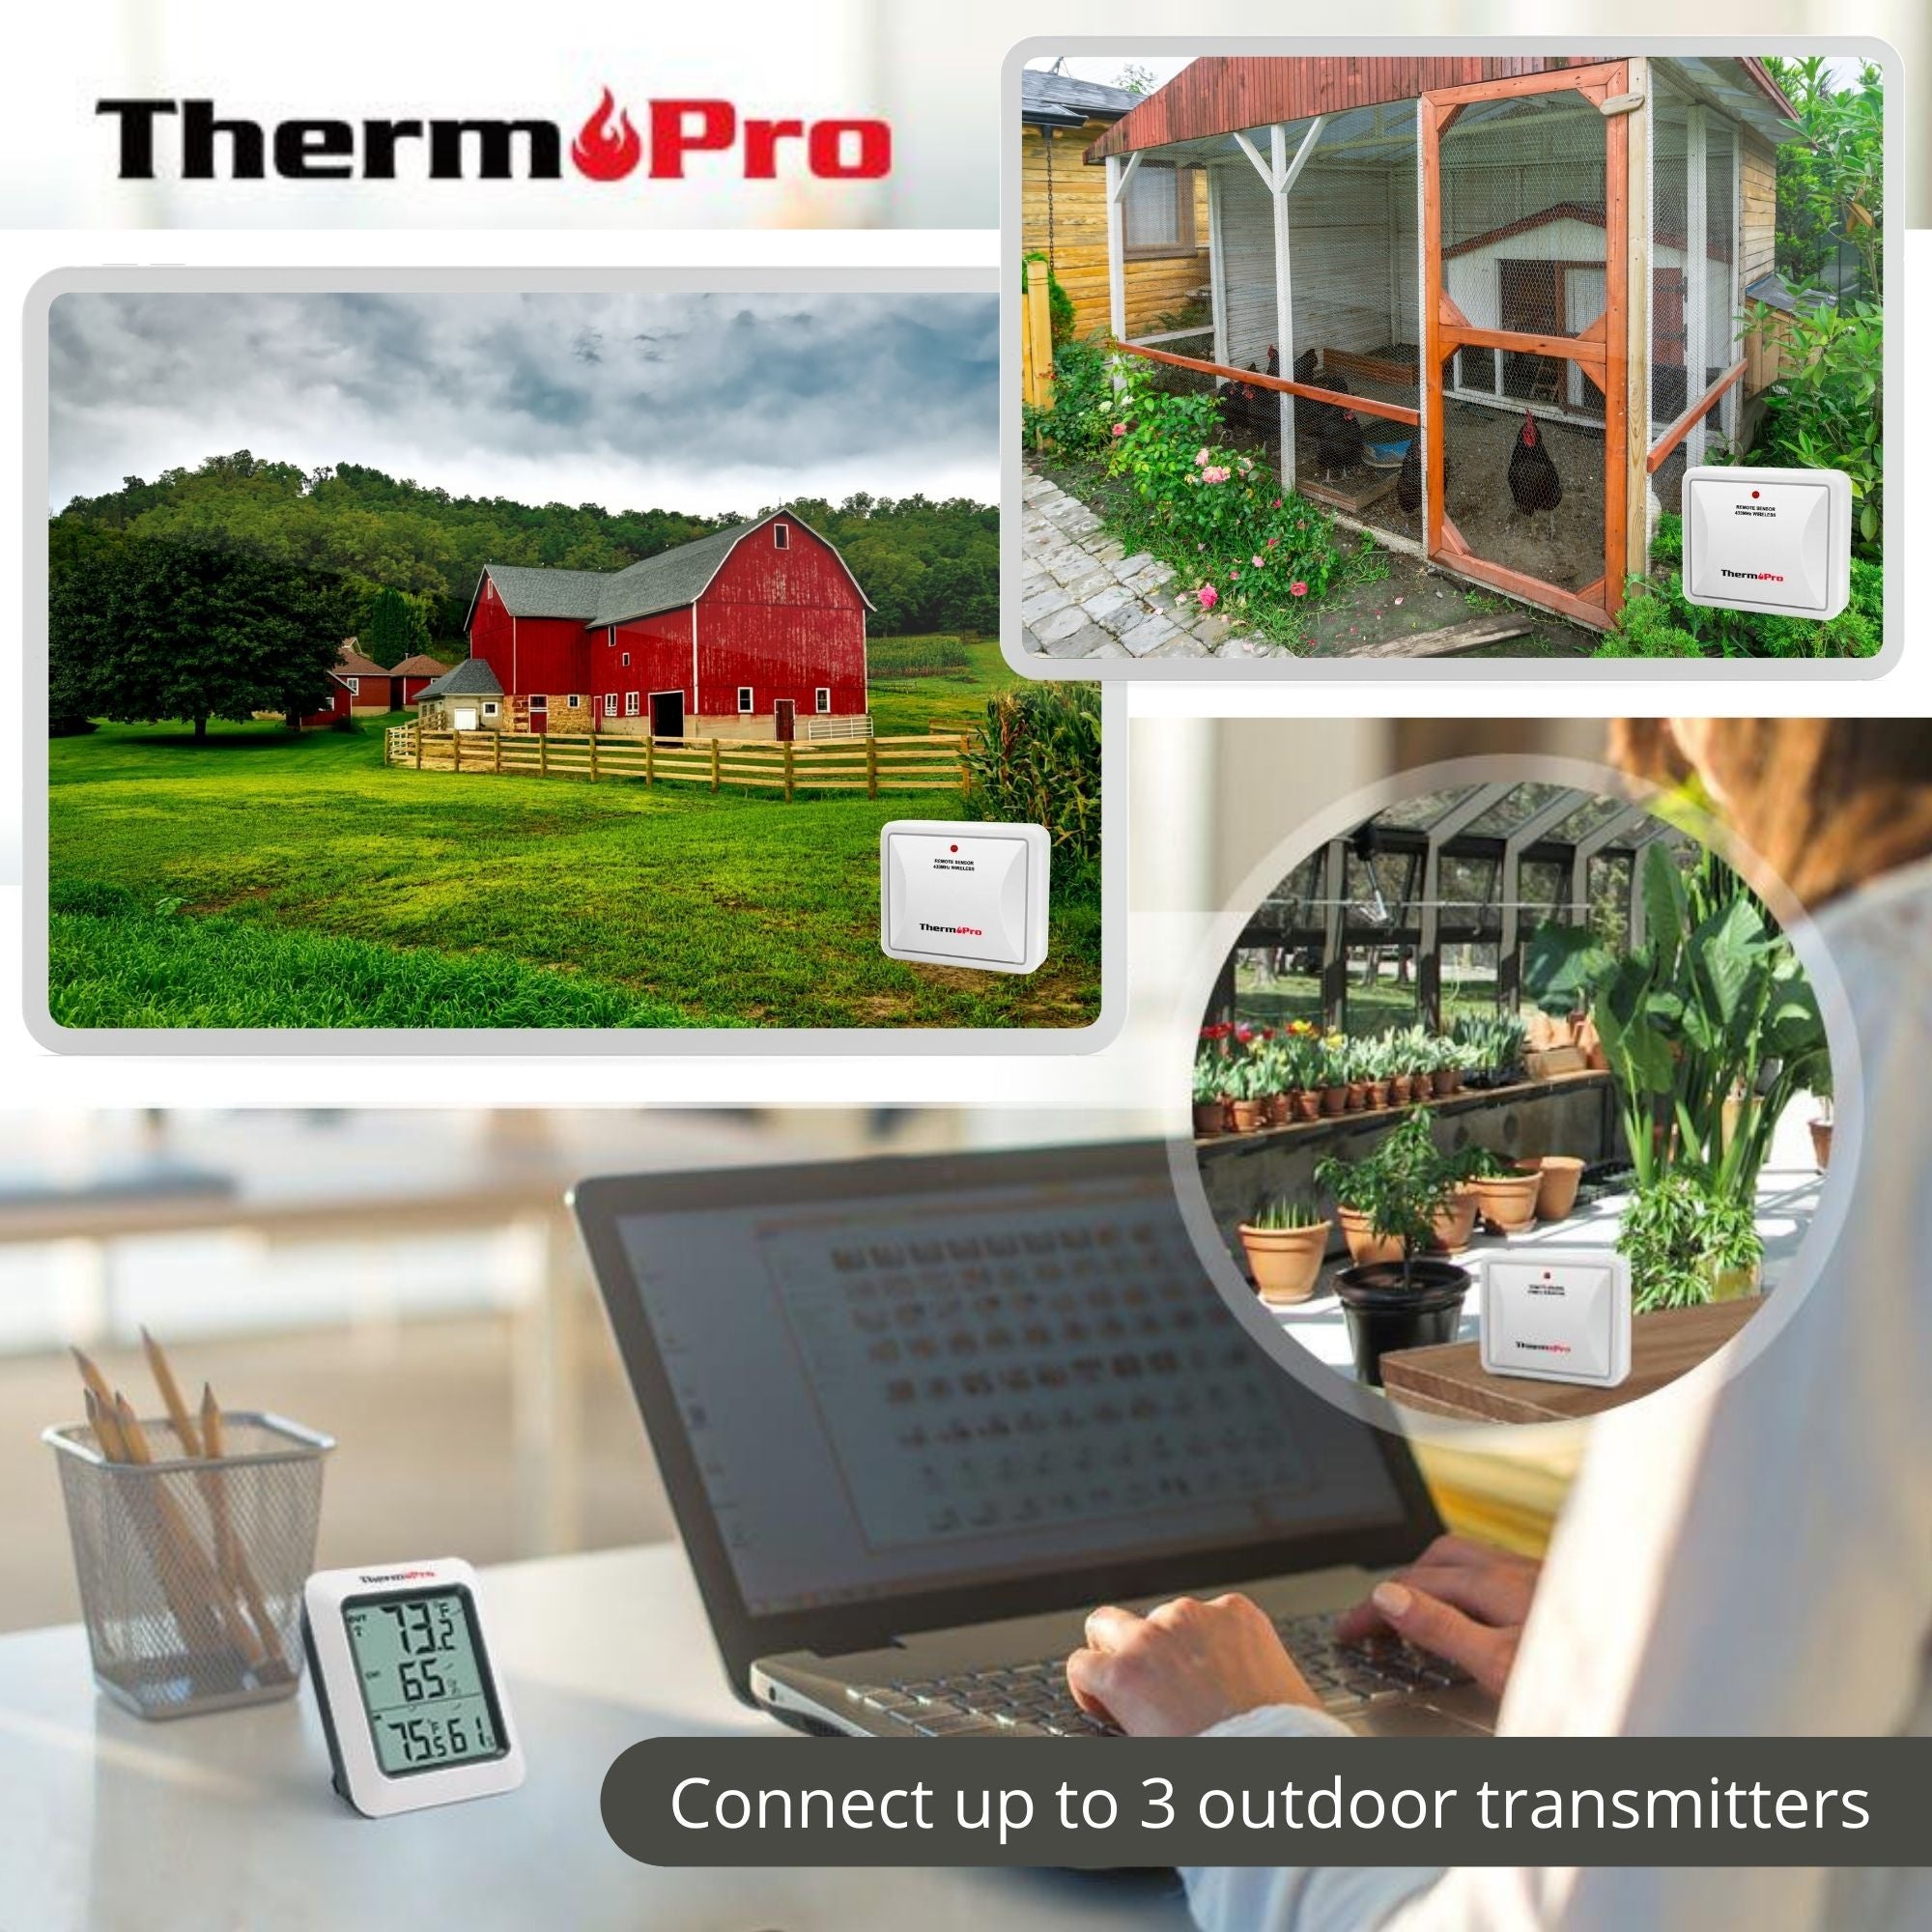 ThermoPro - Connect up to 3 transmitters - Hatching Time